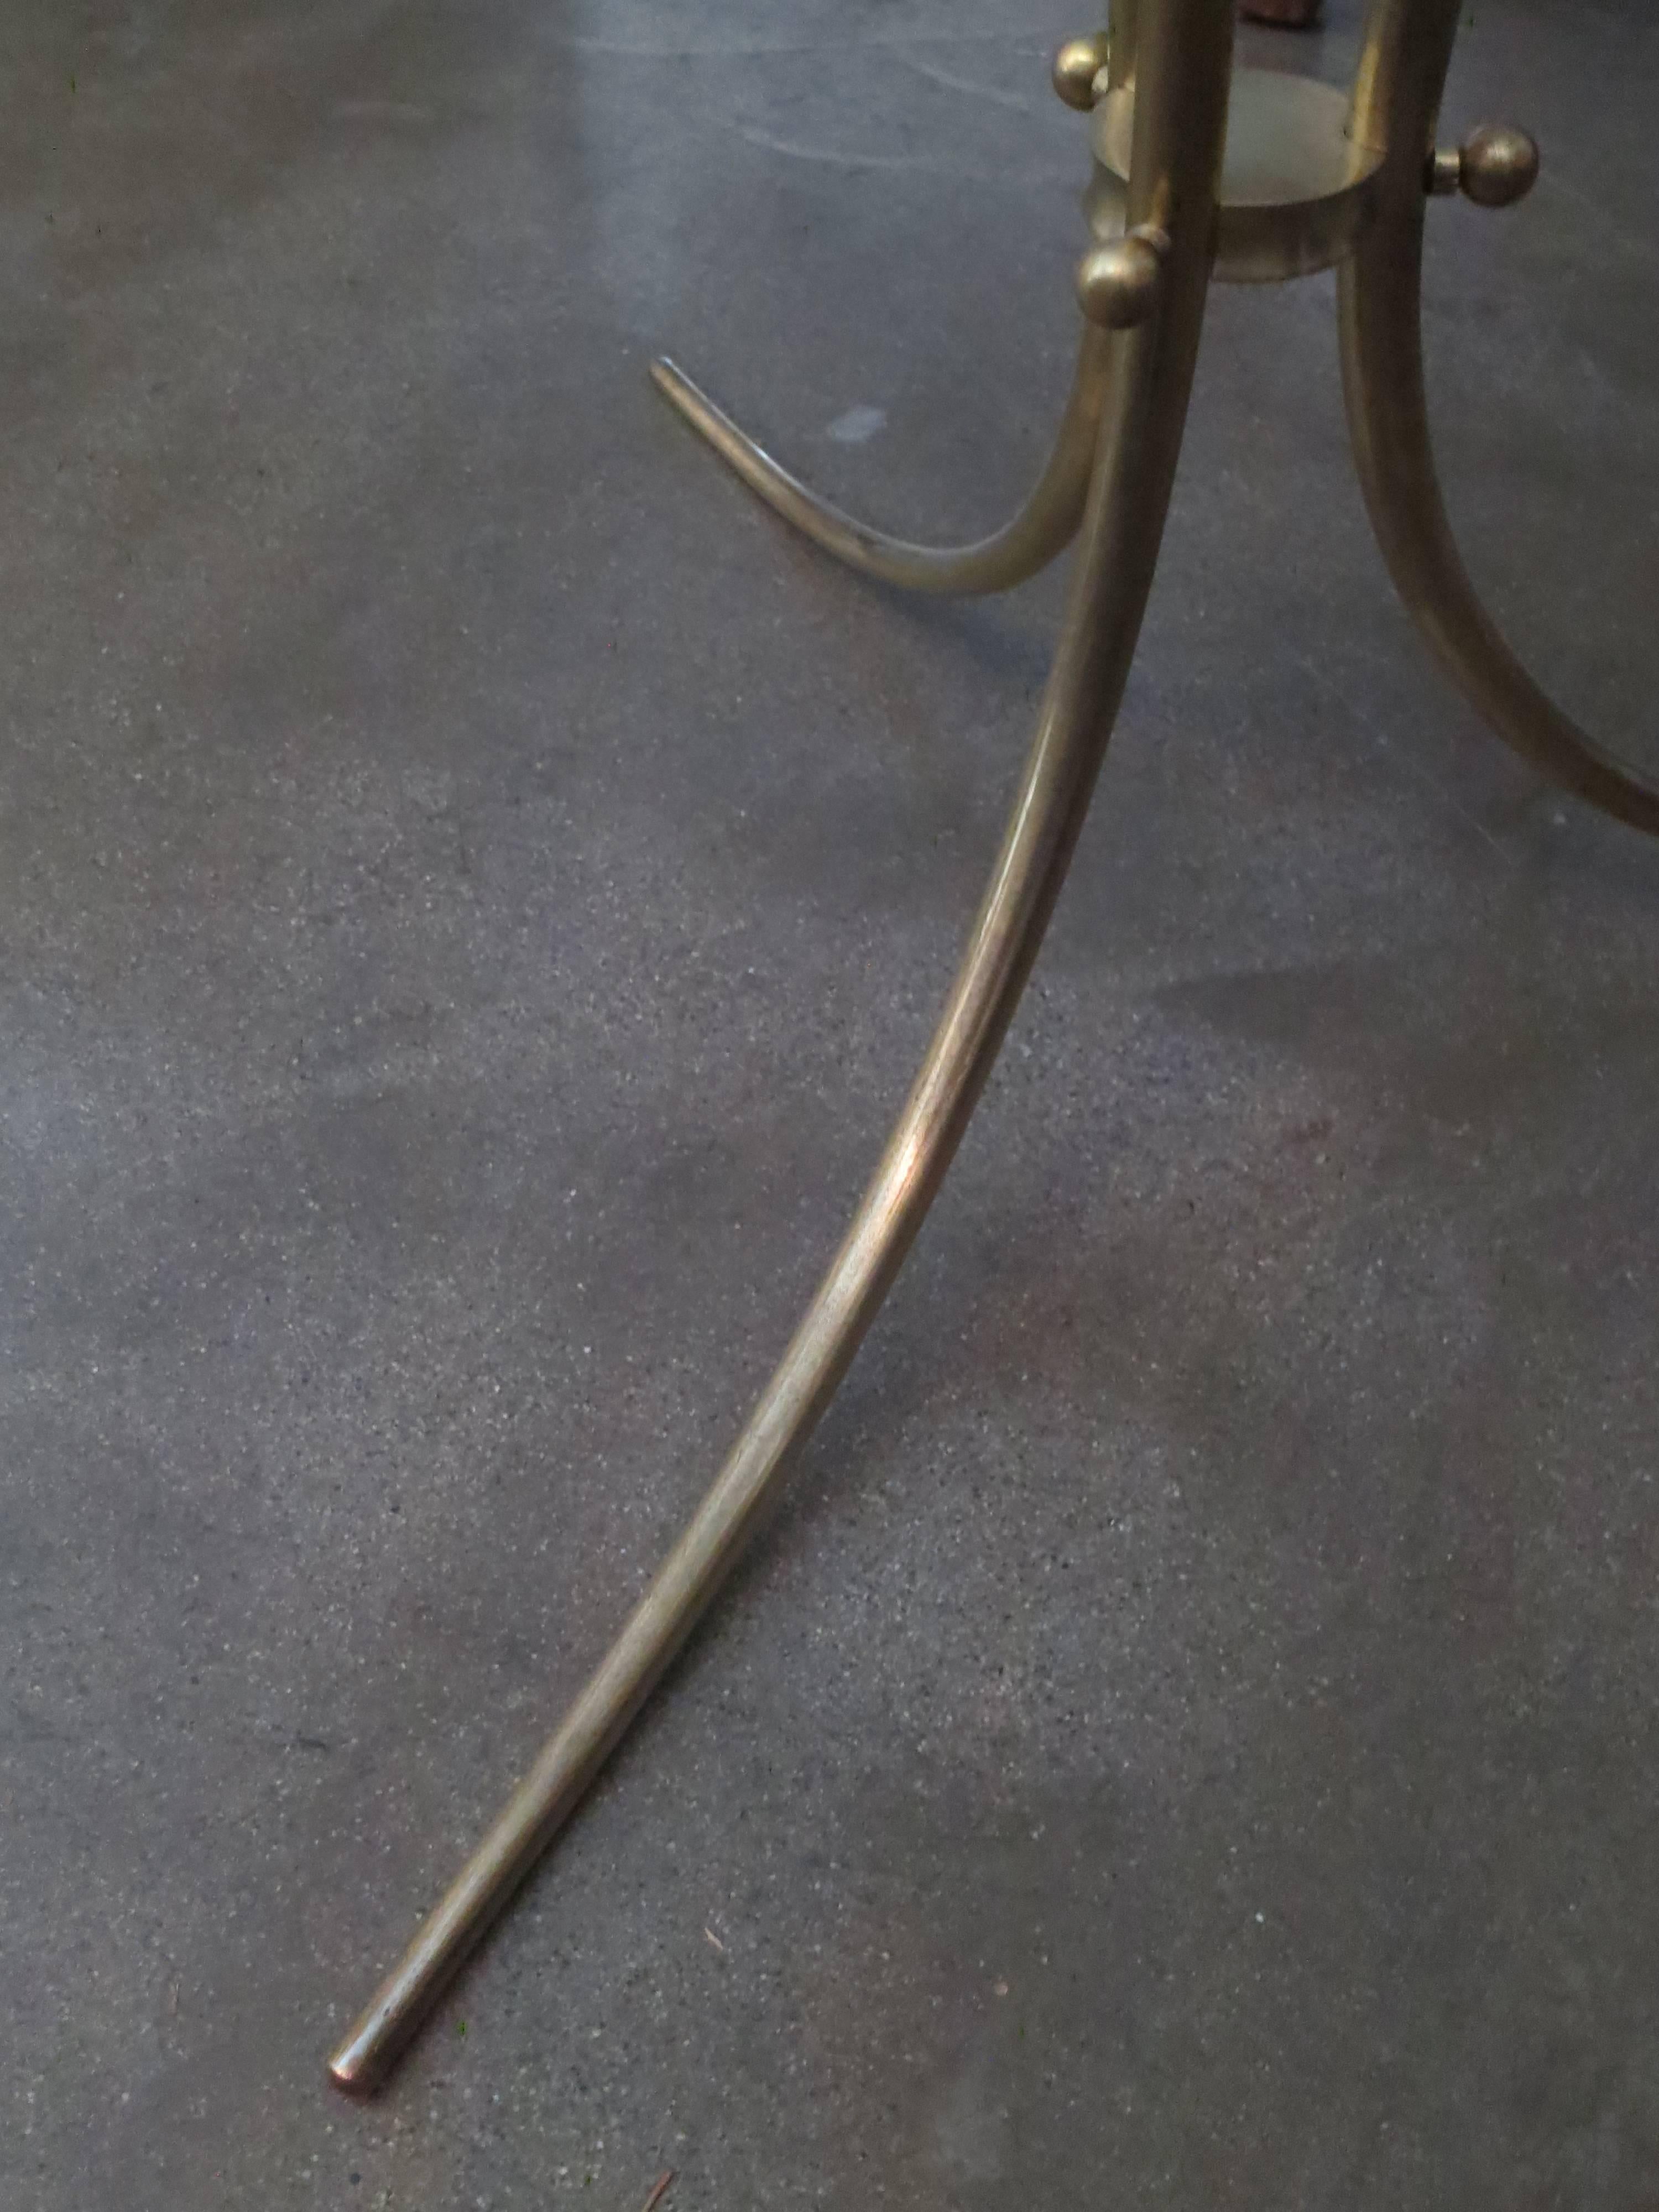 20th Century Brass Side Table